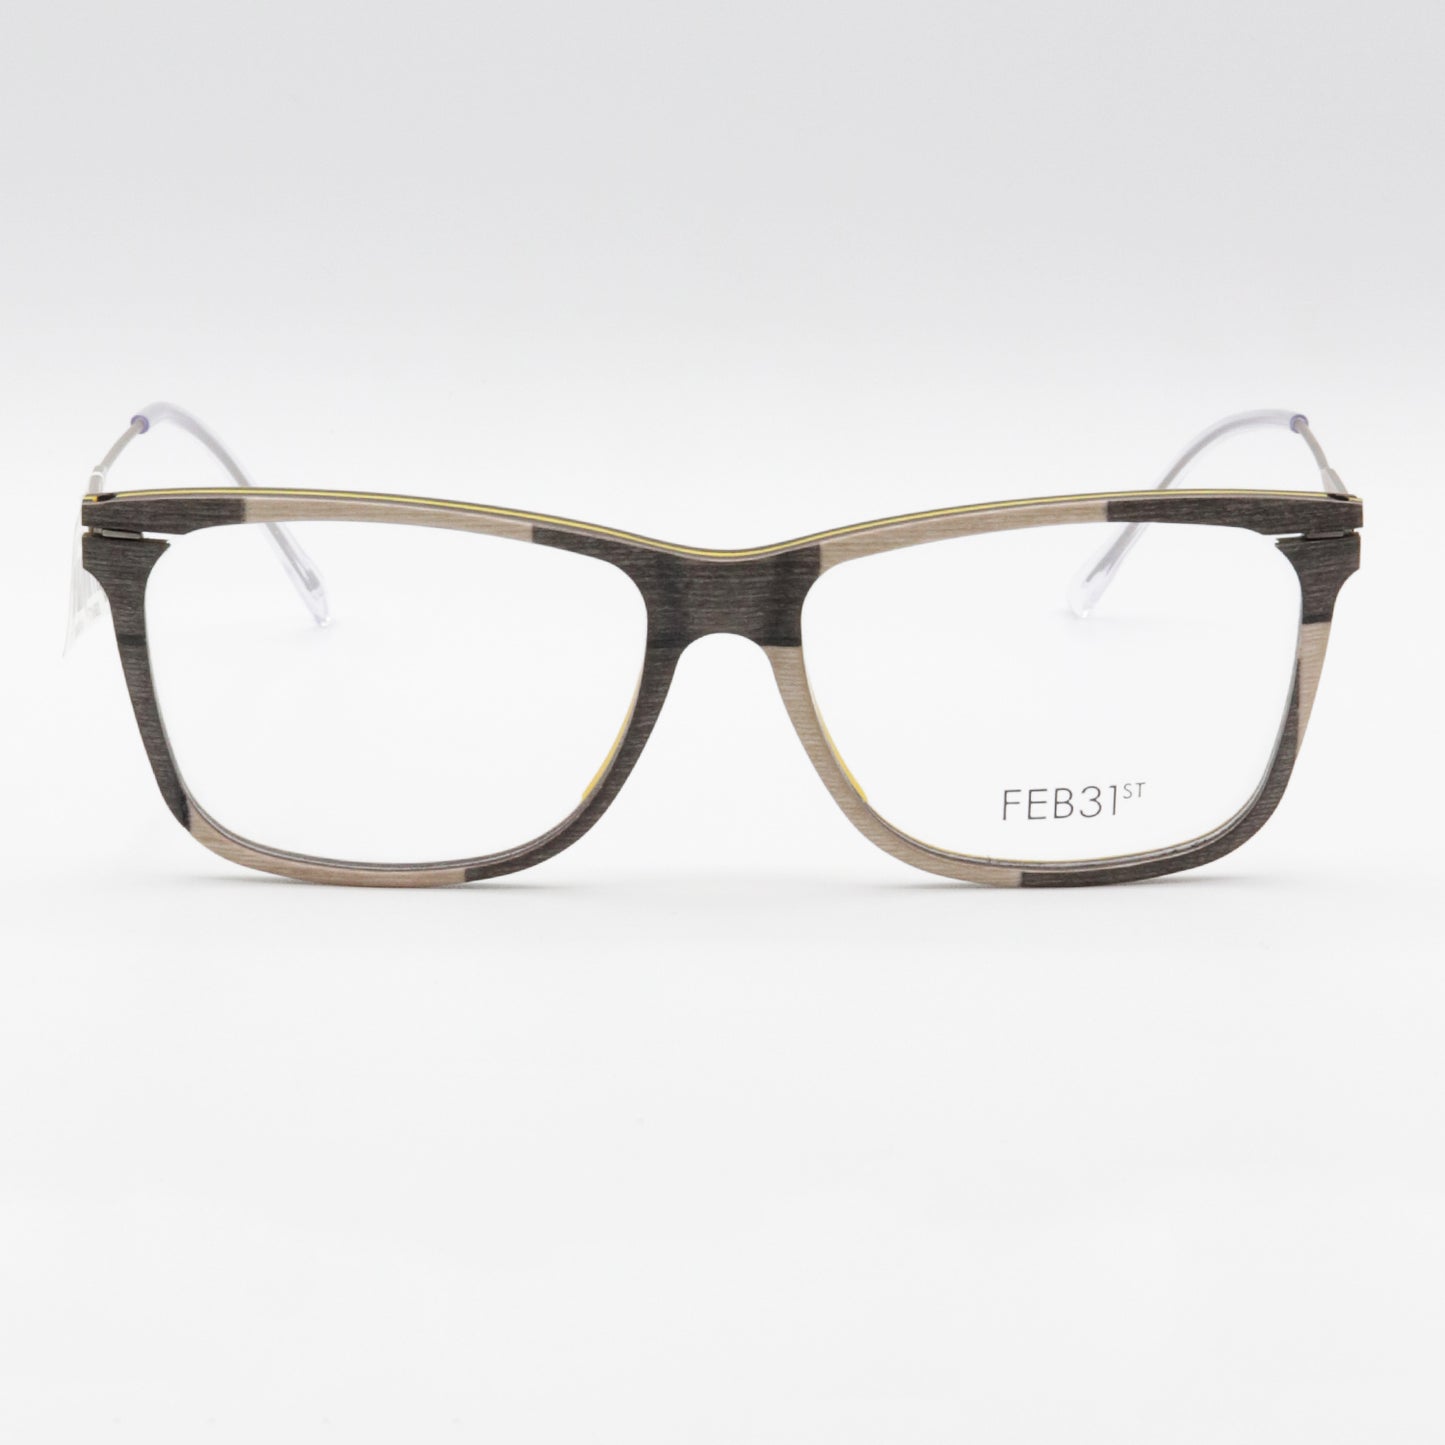 Marz by FEB31st wooden glasses Brown and Yellow